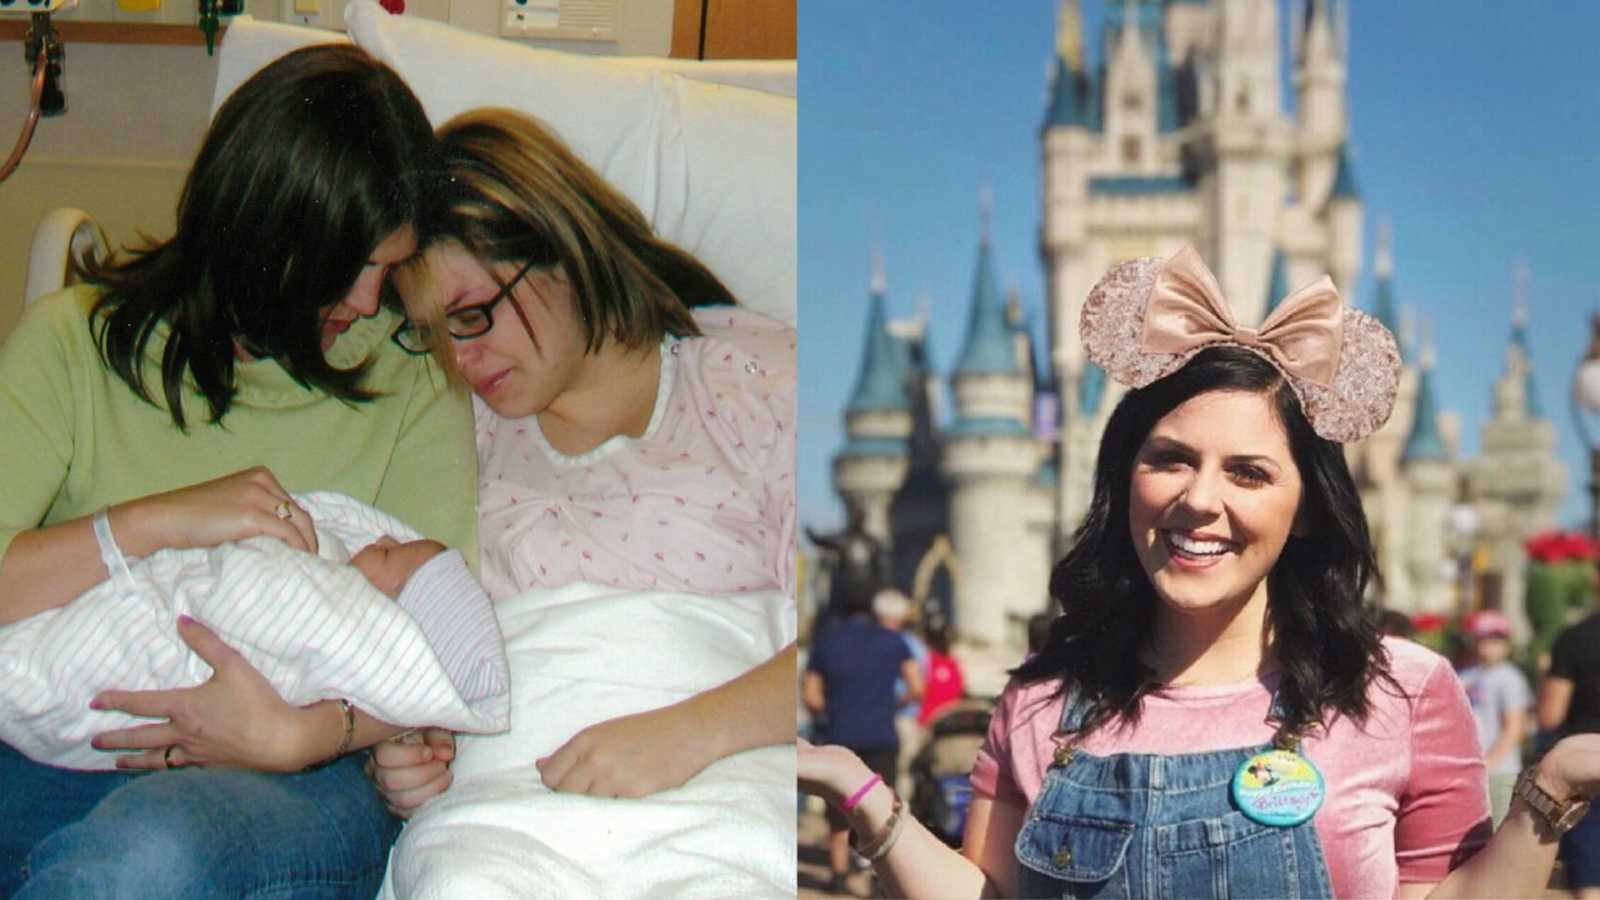 birth mom reunites with her daughter's adoptive family in Disney World